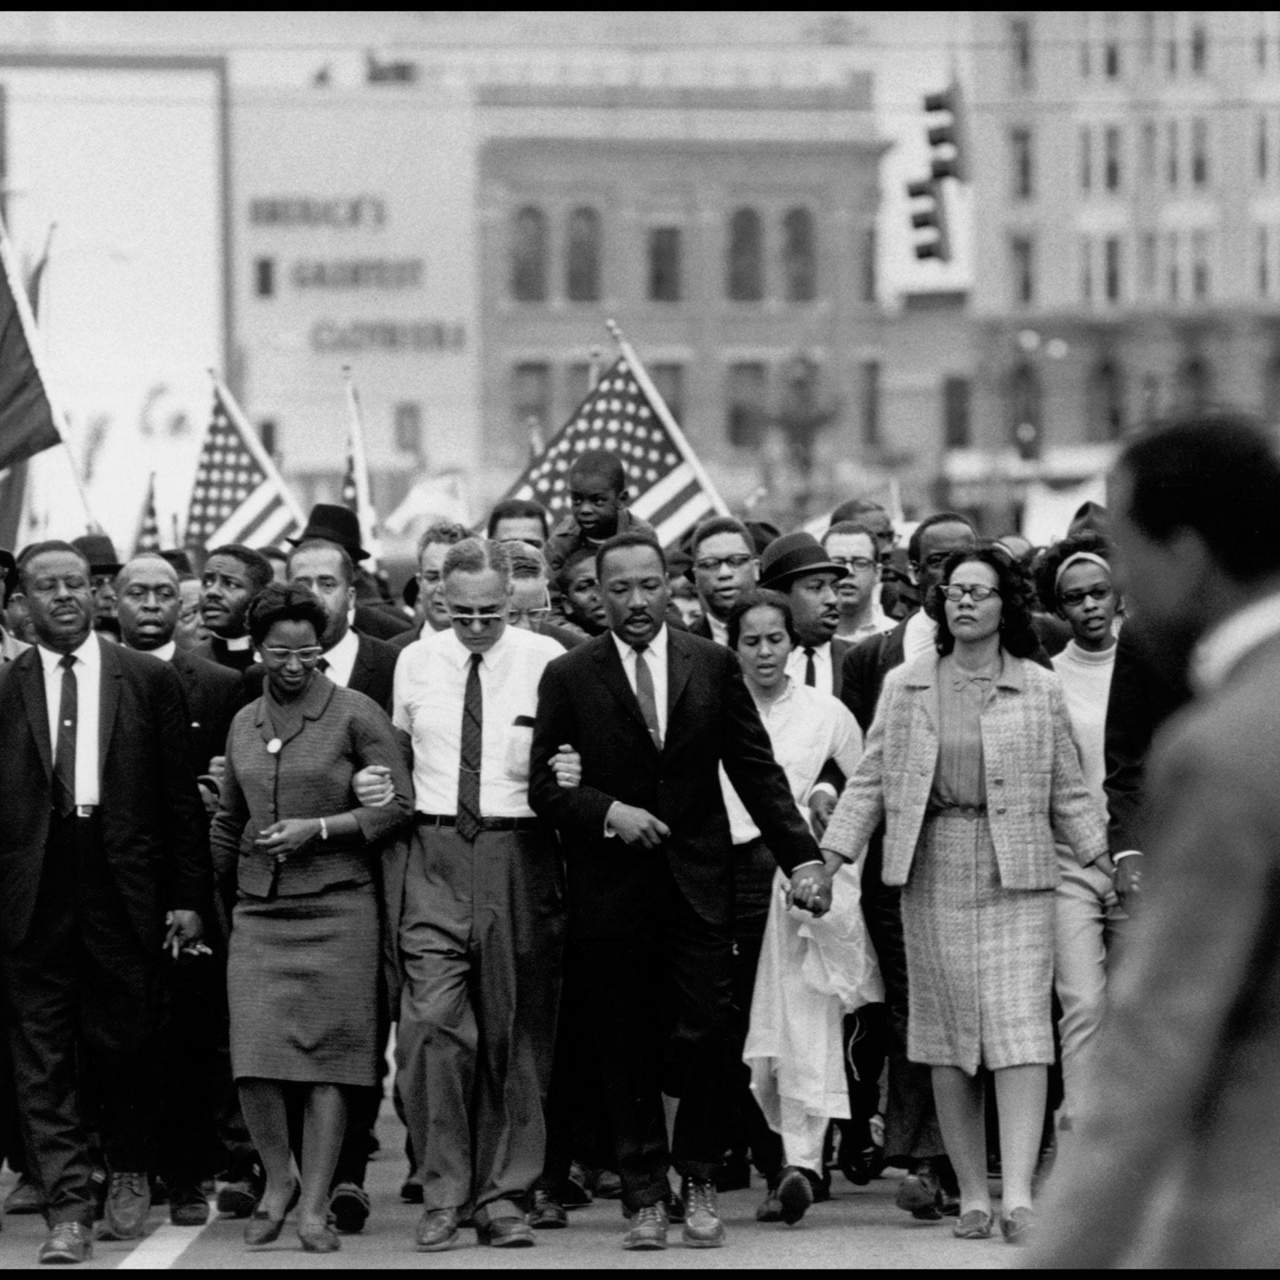 Martin Luther King Jr. at a peaceful protest